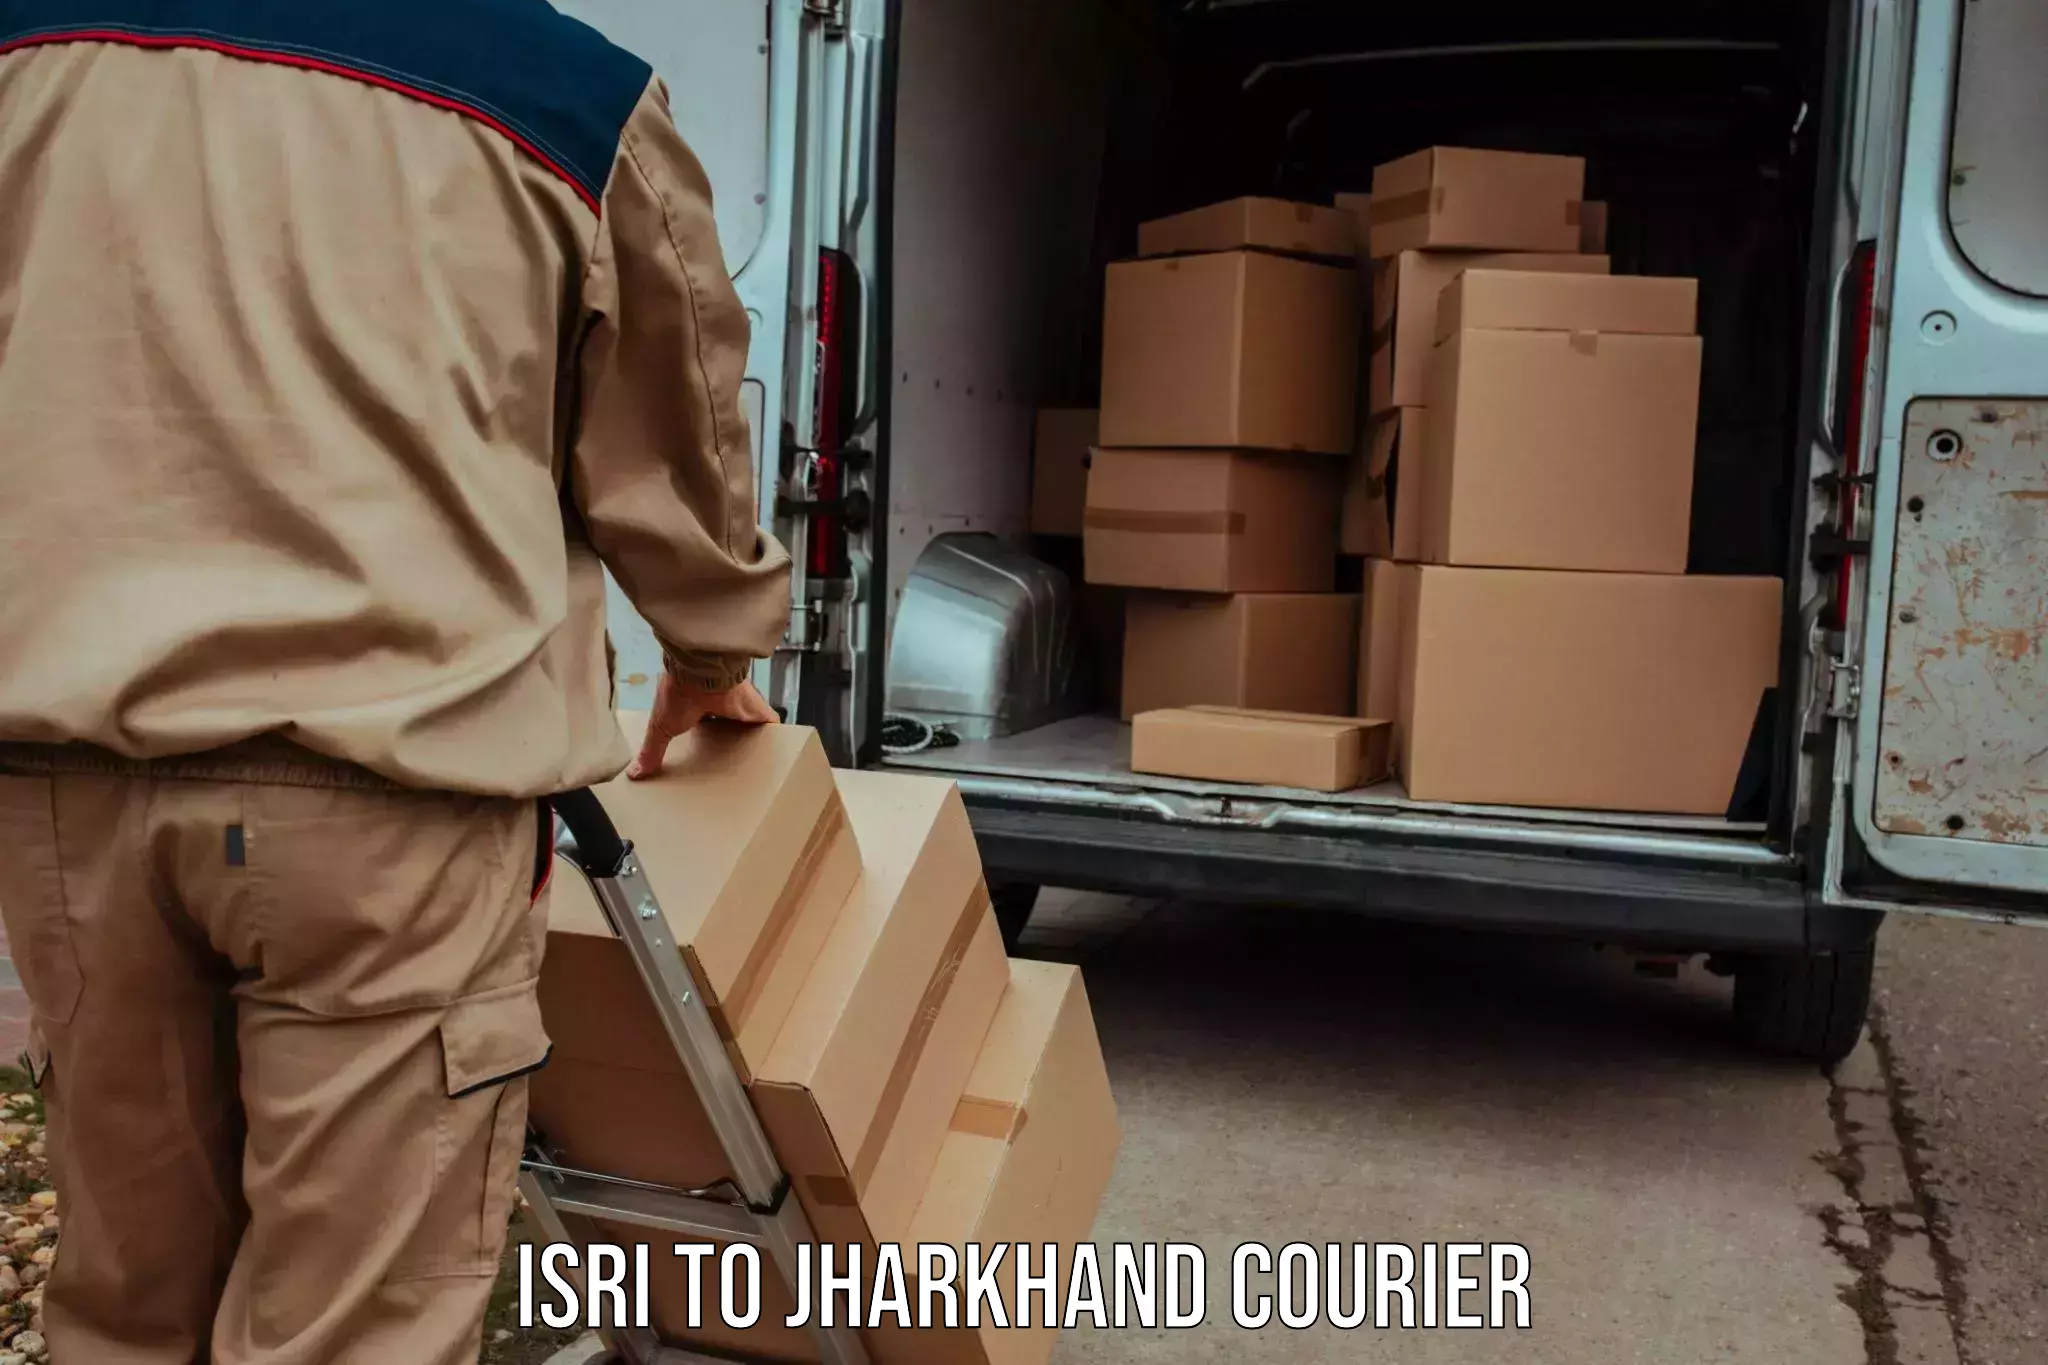 Professional courier handling Isri to Isri